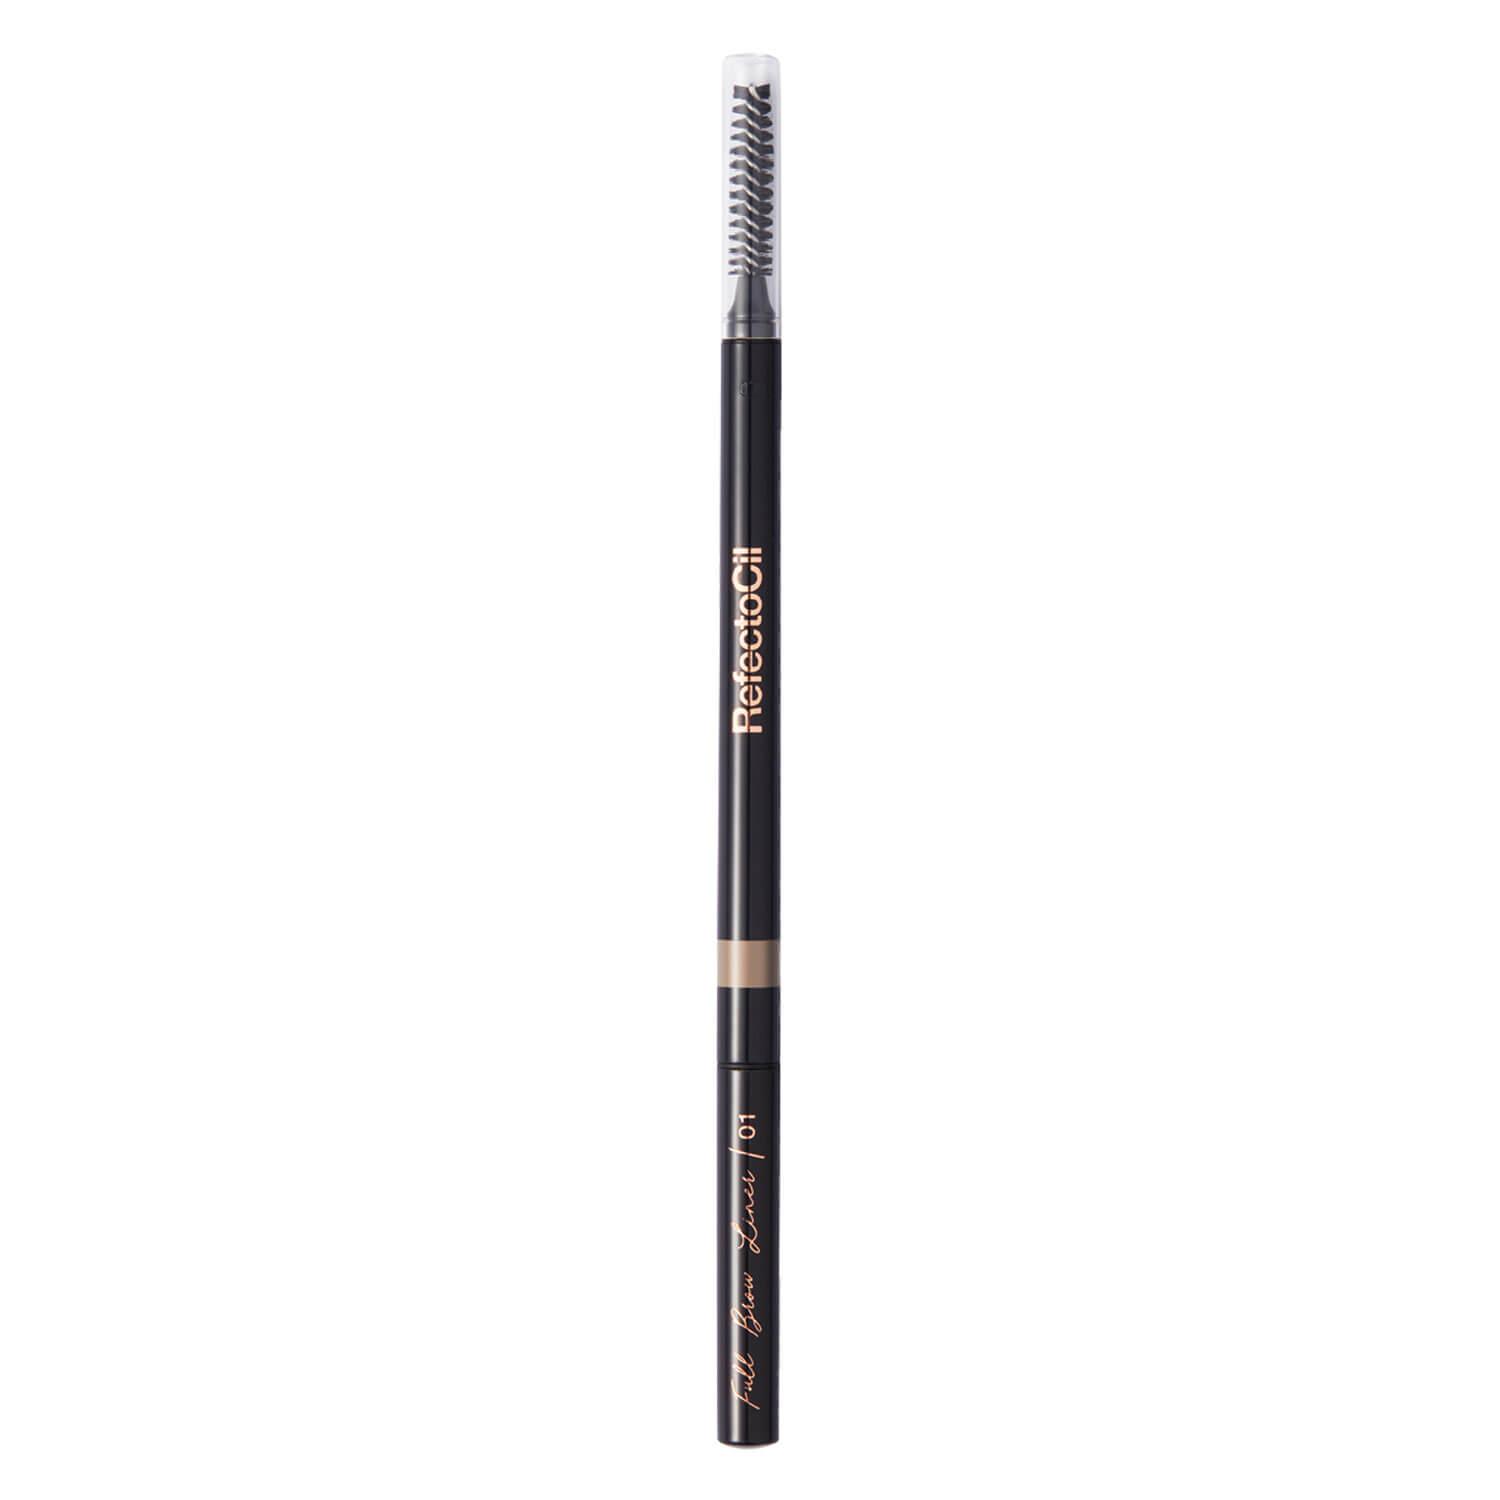 RefectoCil - Full Brow Liner Light 1